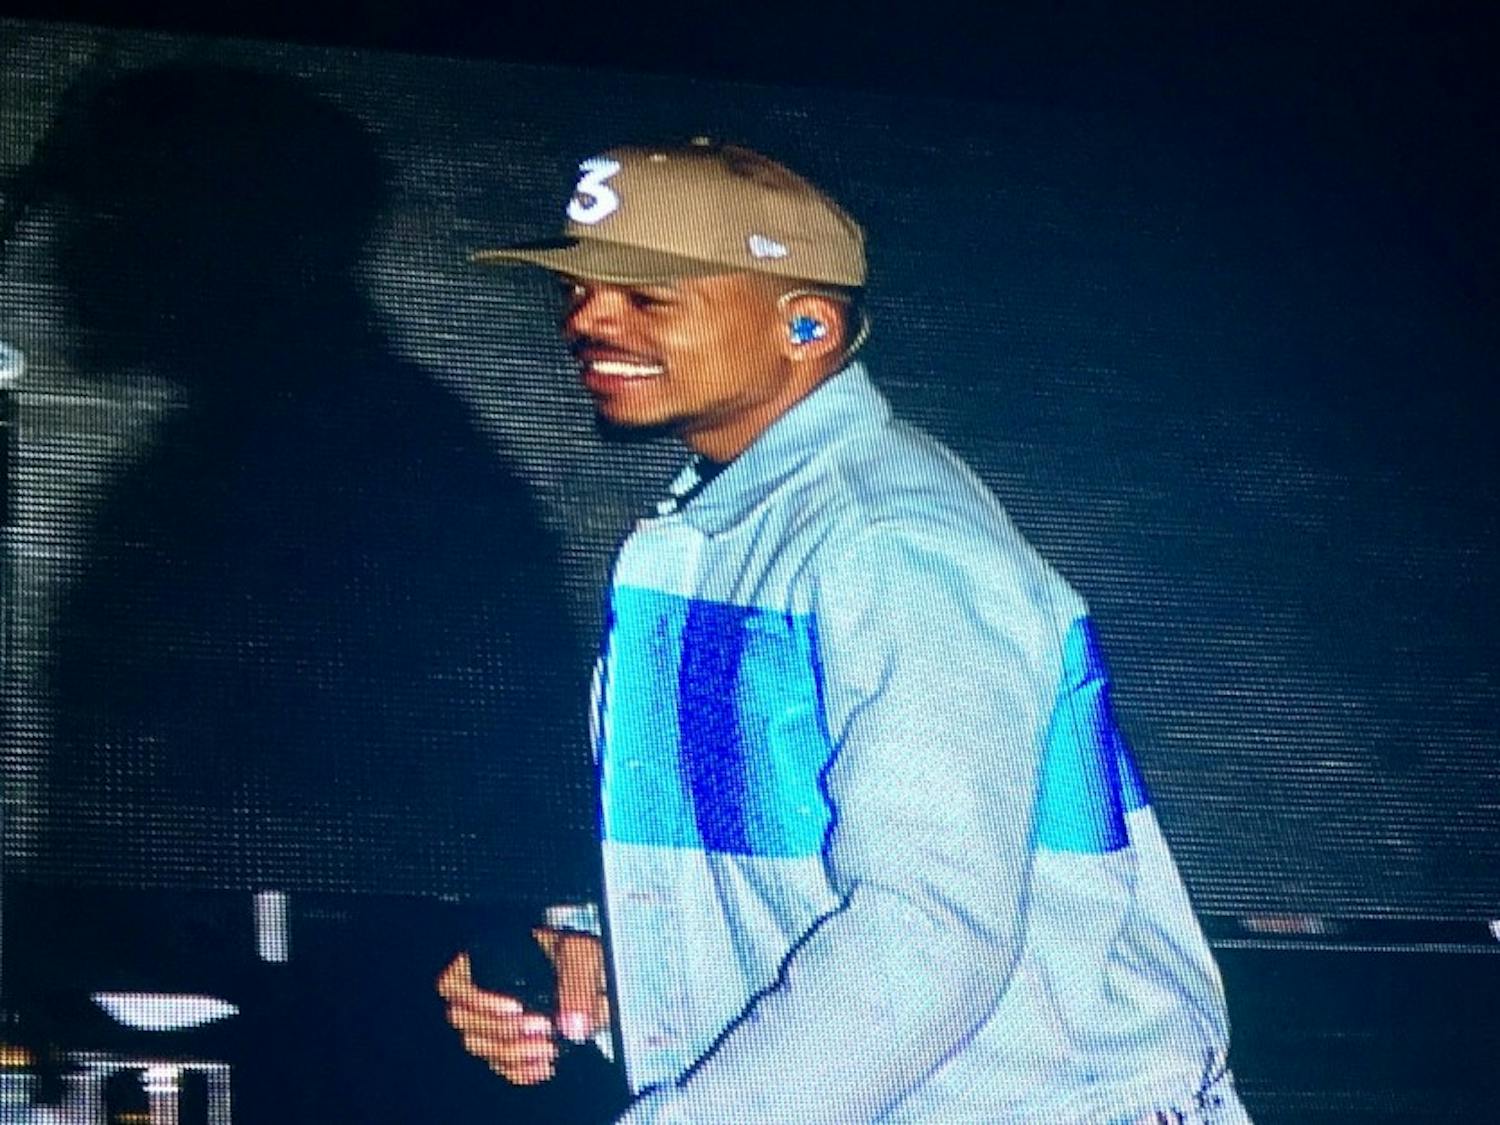 Chance the Rapper performed songs from his Grammy Award-winning album "Coloring Book."